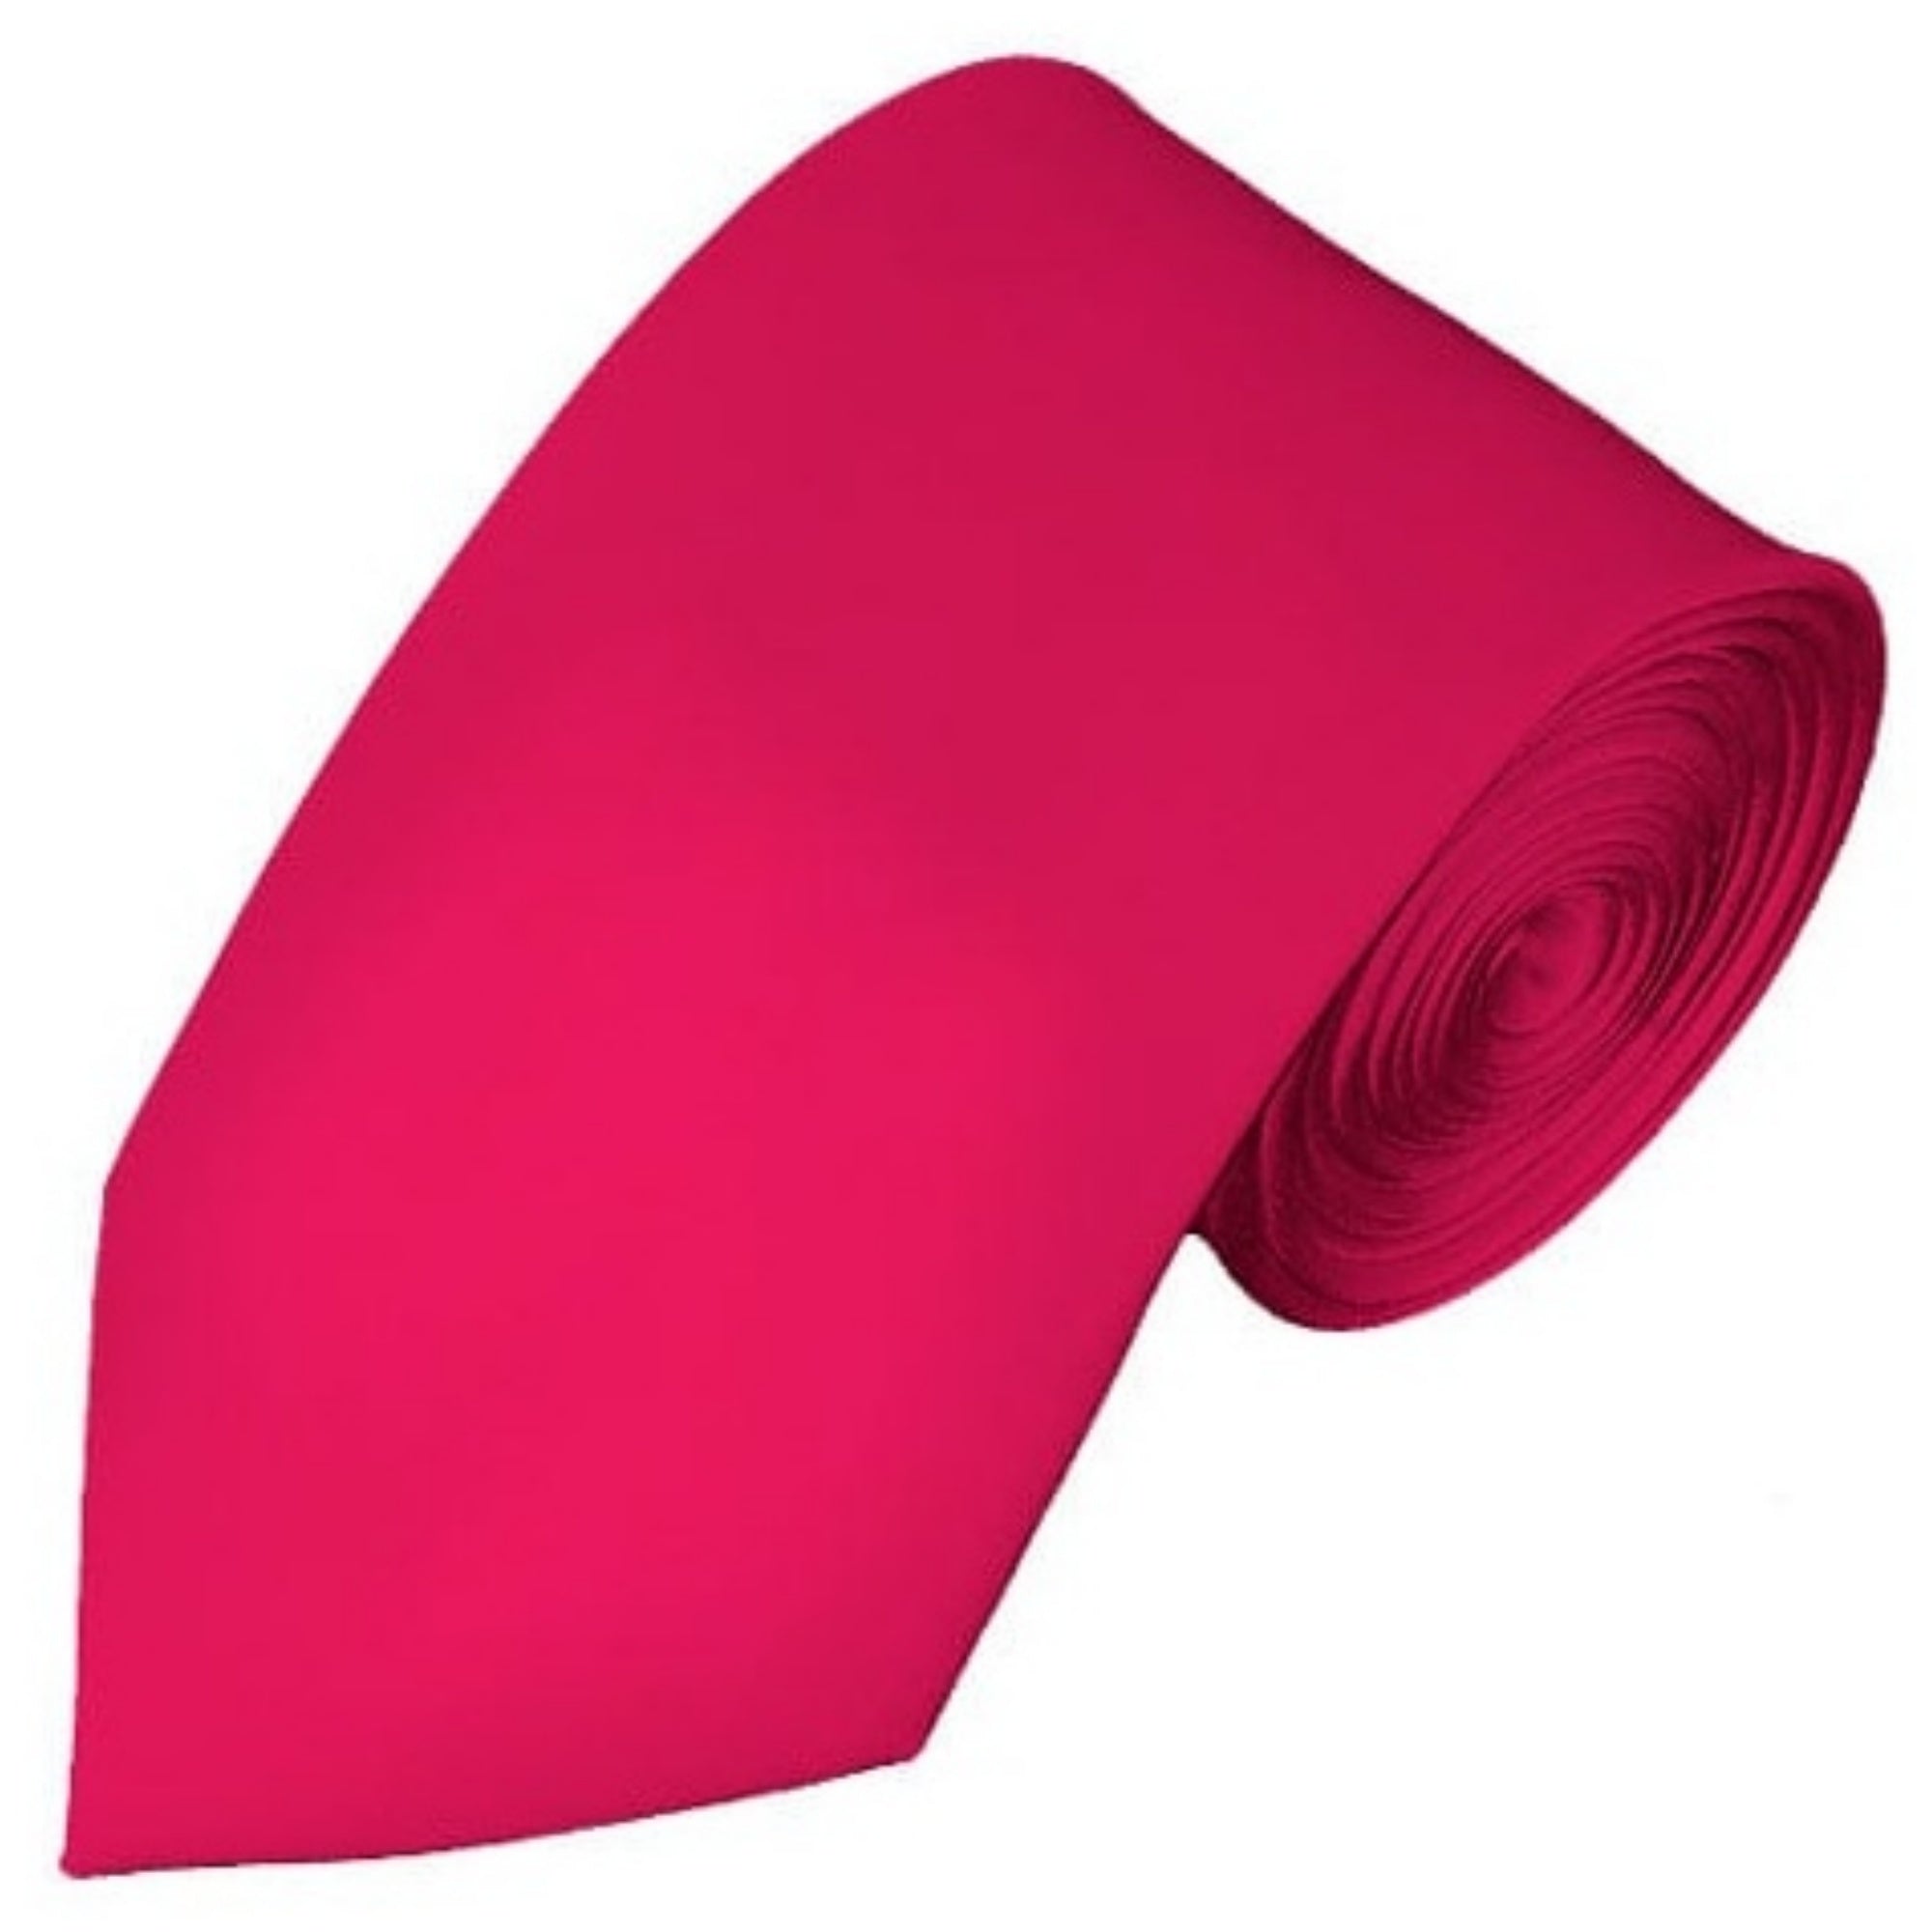 TheDapperTie Men's Solid Color Slim 2.75 Inch Wide And 58 Inch Long Neckties Neck Tie TheDapperTie Fuchsia  